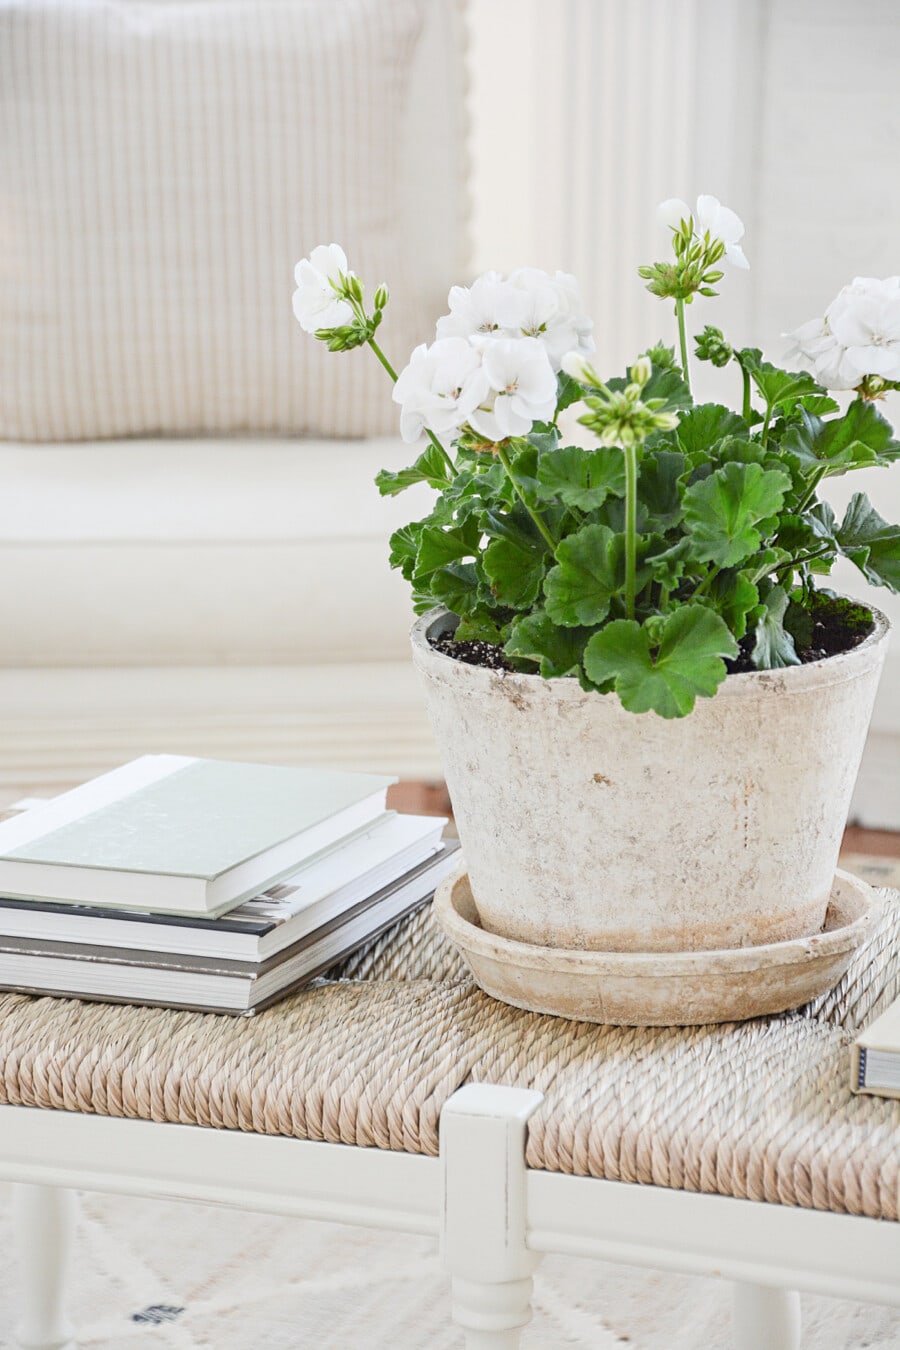 Using Summer Annuals And Perrenials To Decorate Indoors